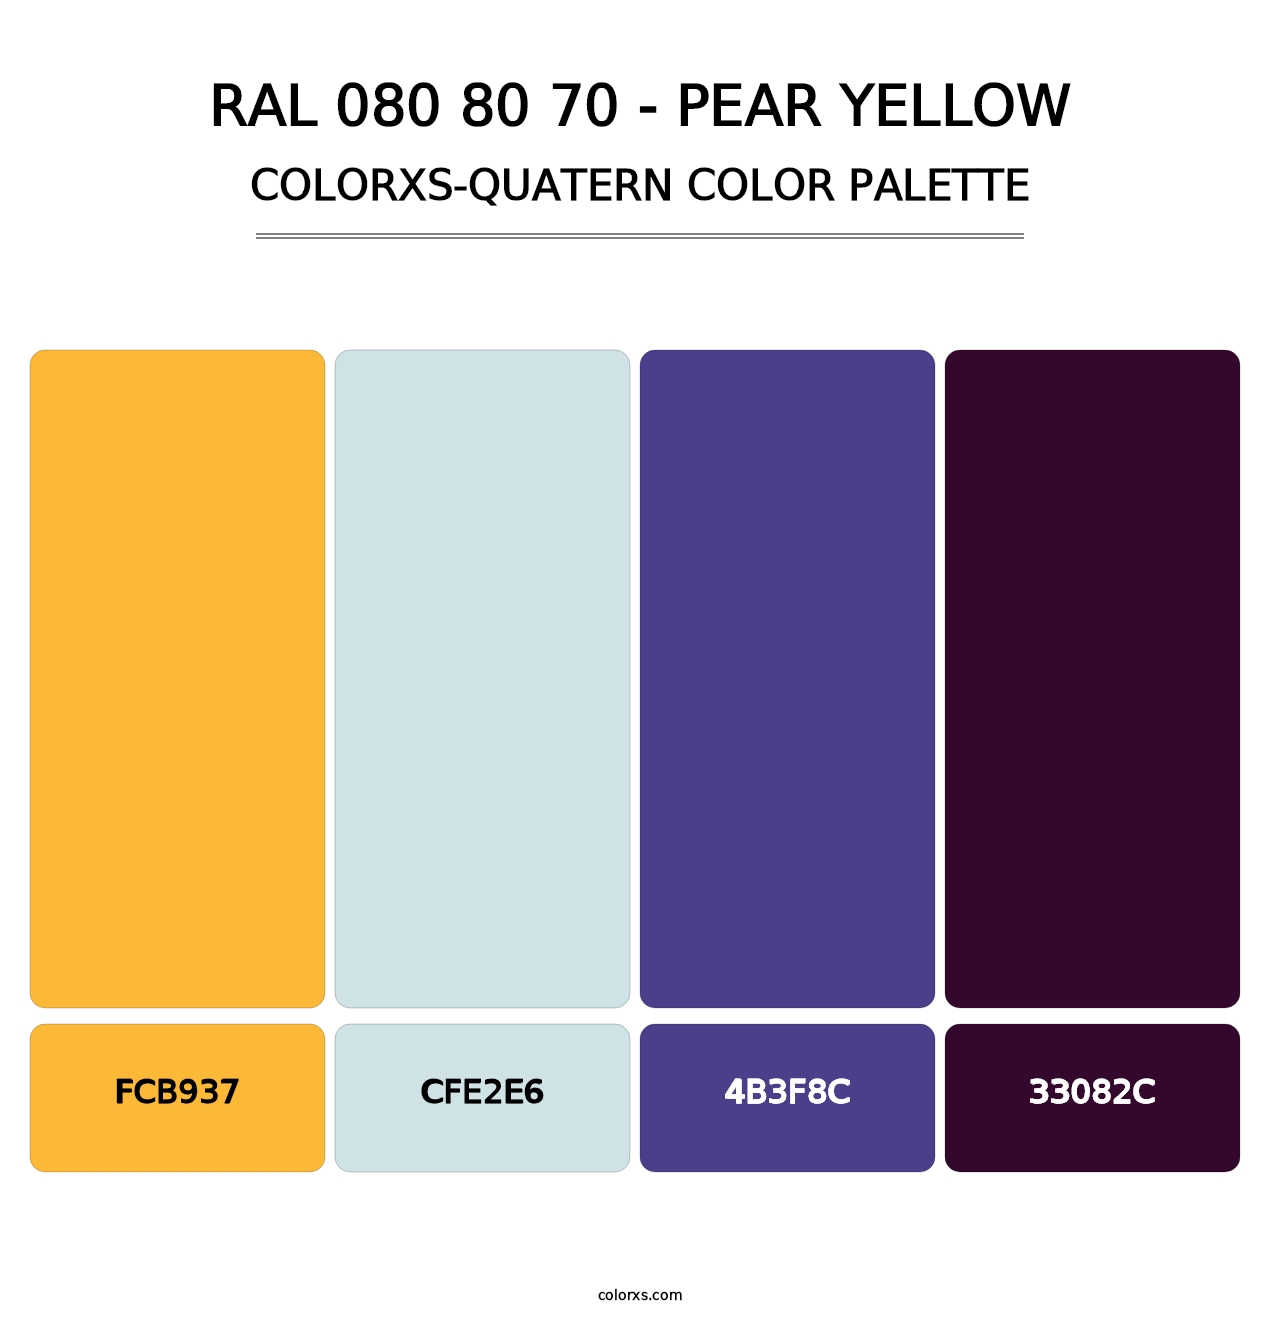 RAL 080 80 70 - Pear Yellow - Colorxs Quatern Palette